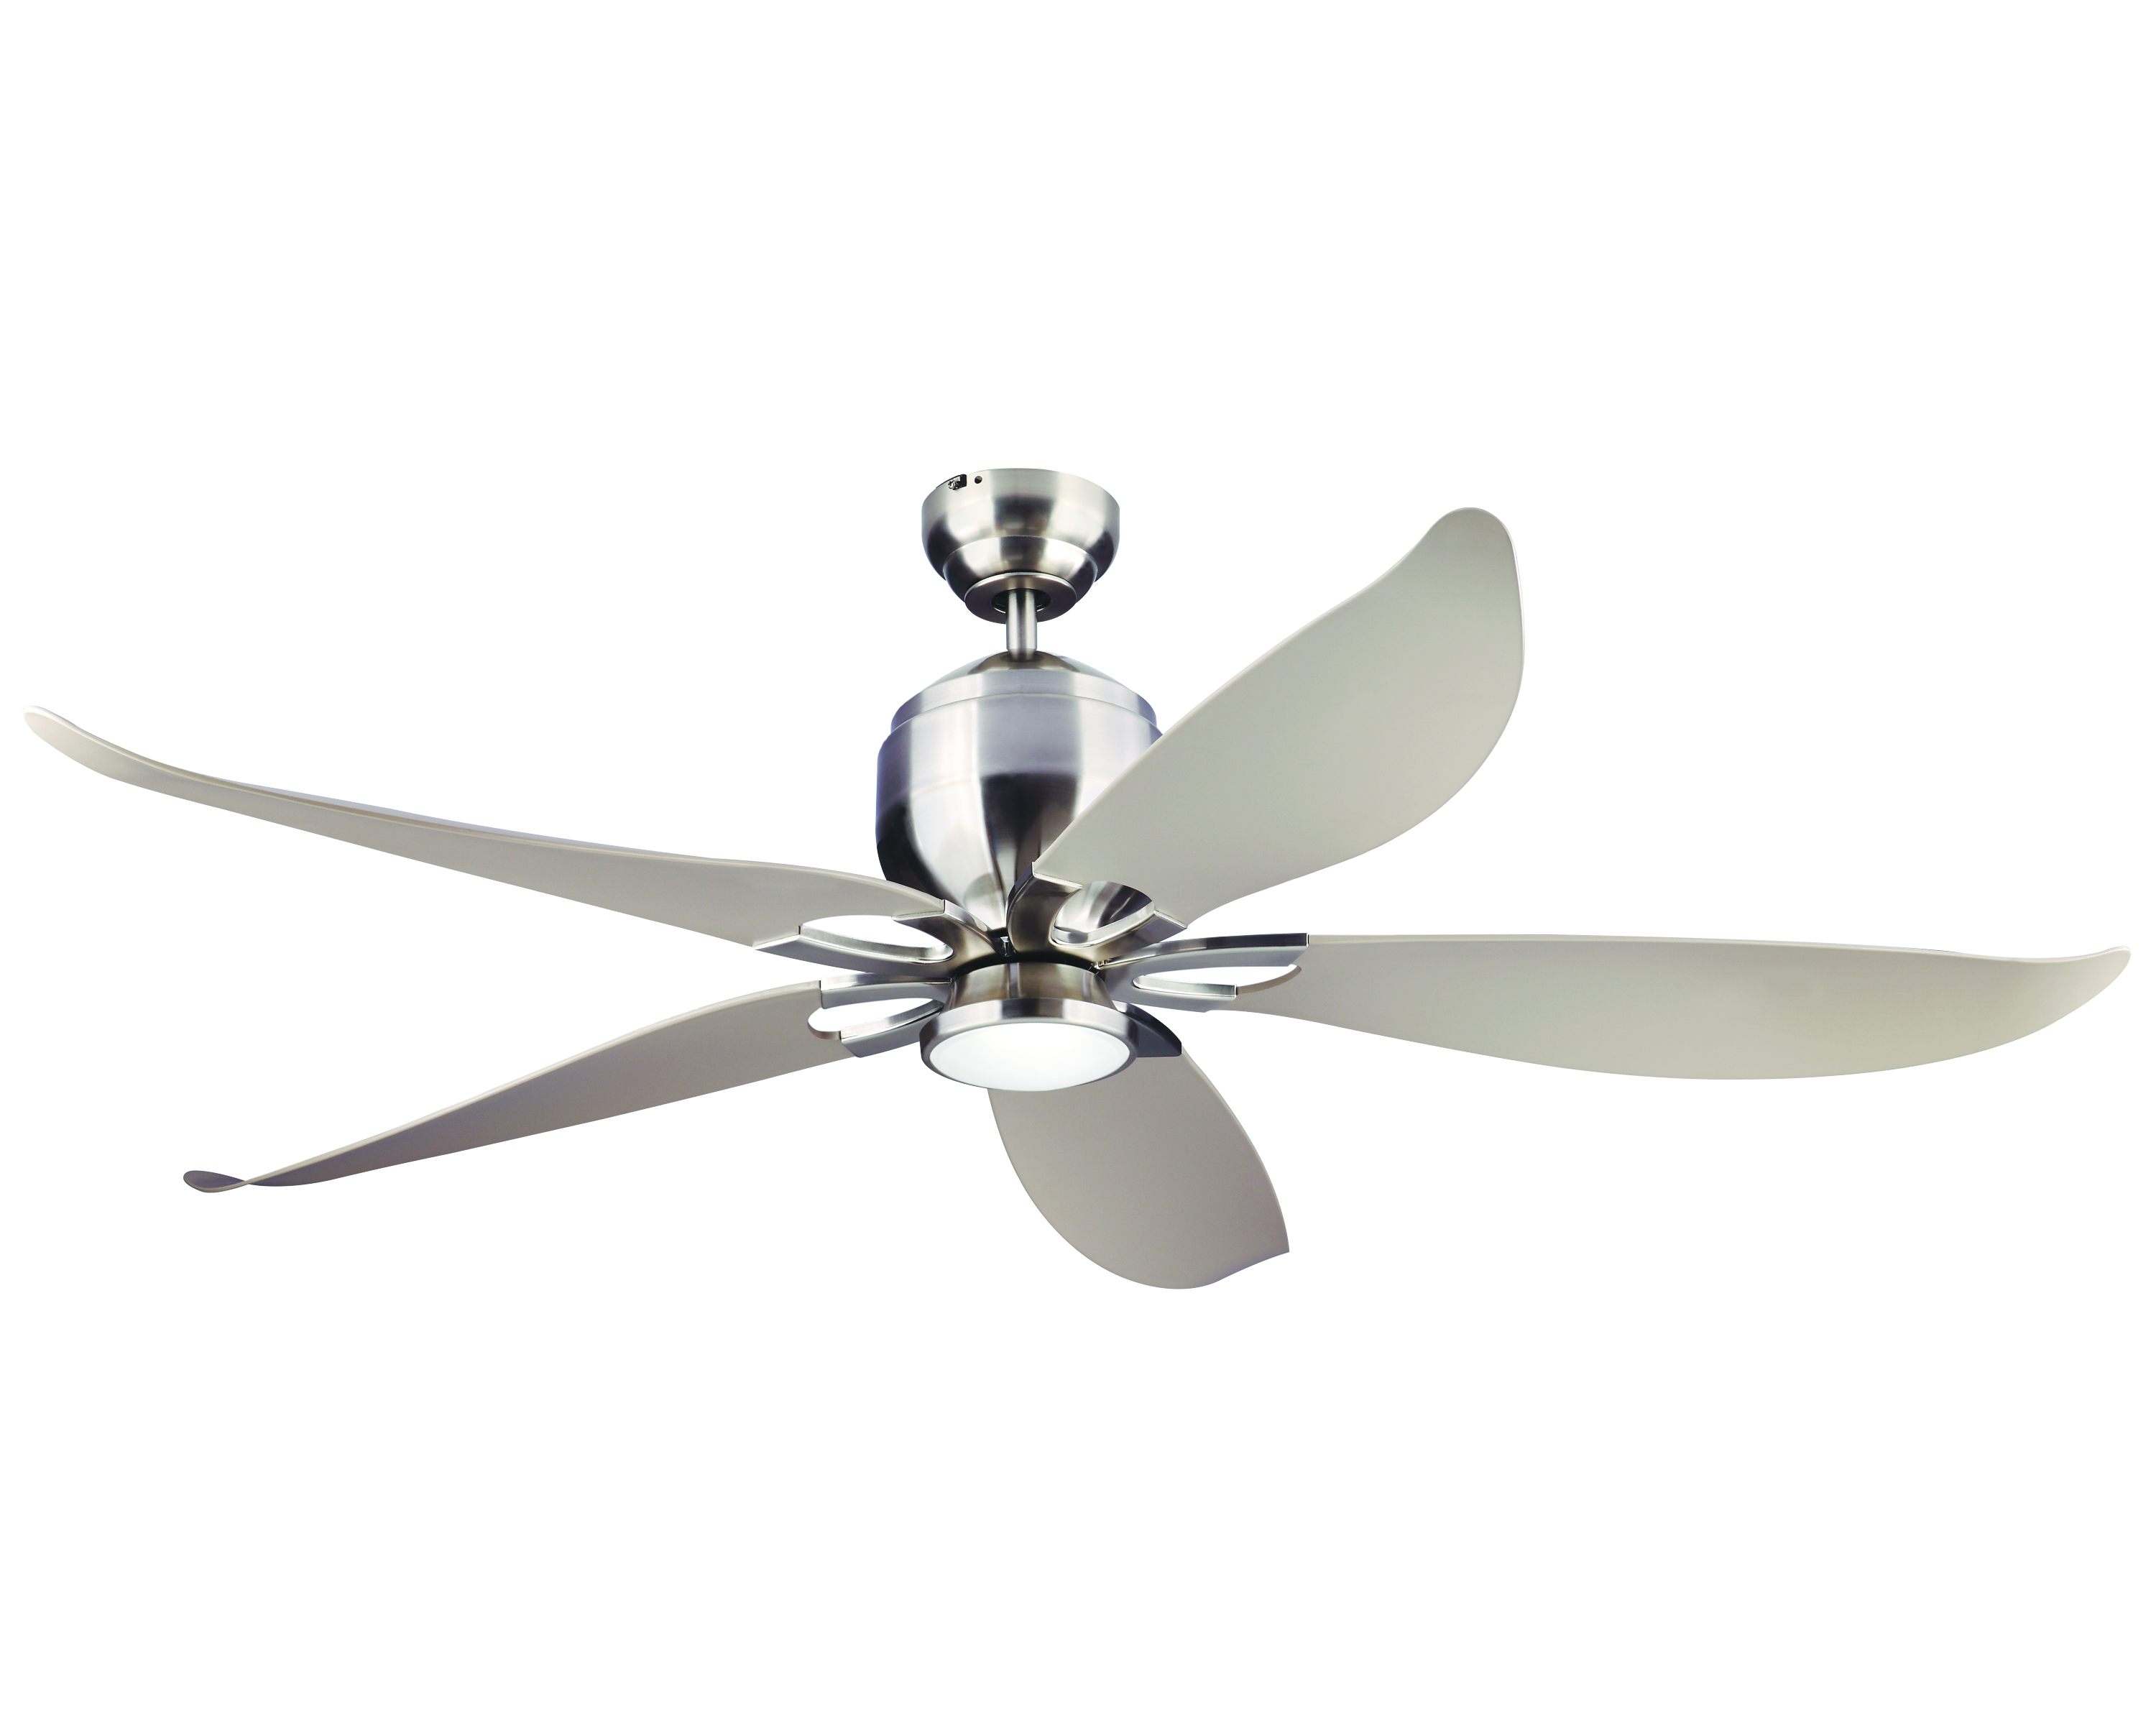 The Lily fan by Monte Carlo has a 12w integrated LED downlight encased in Clear Frost glass with 740 lumens of ourput.